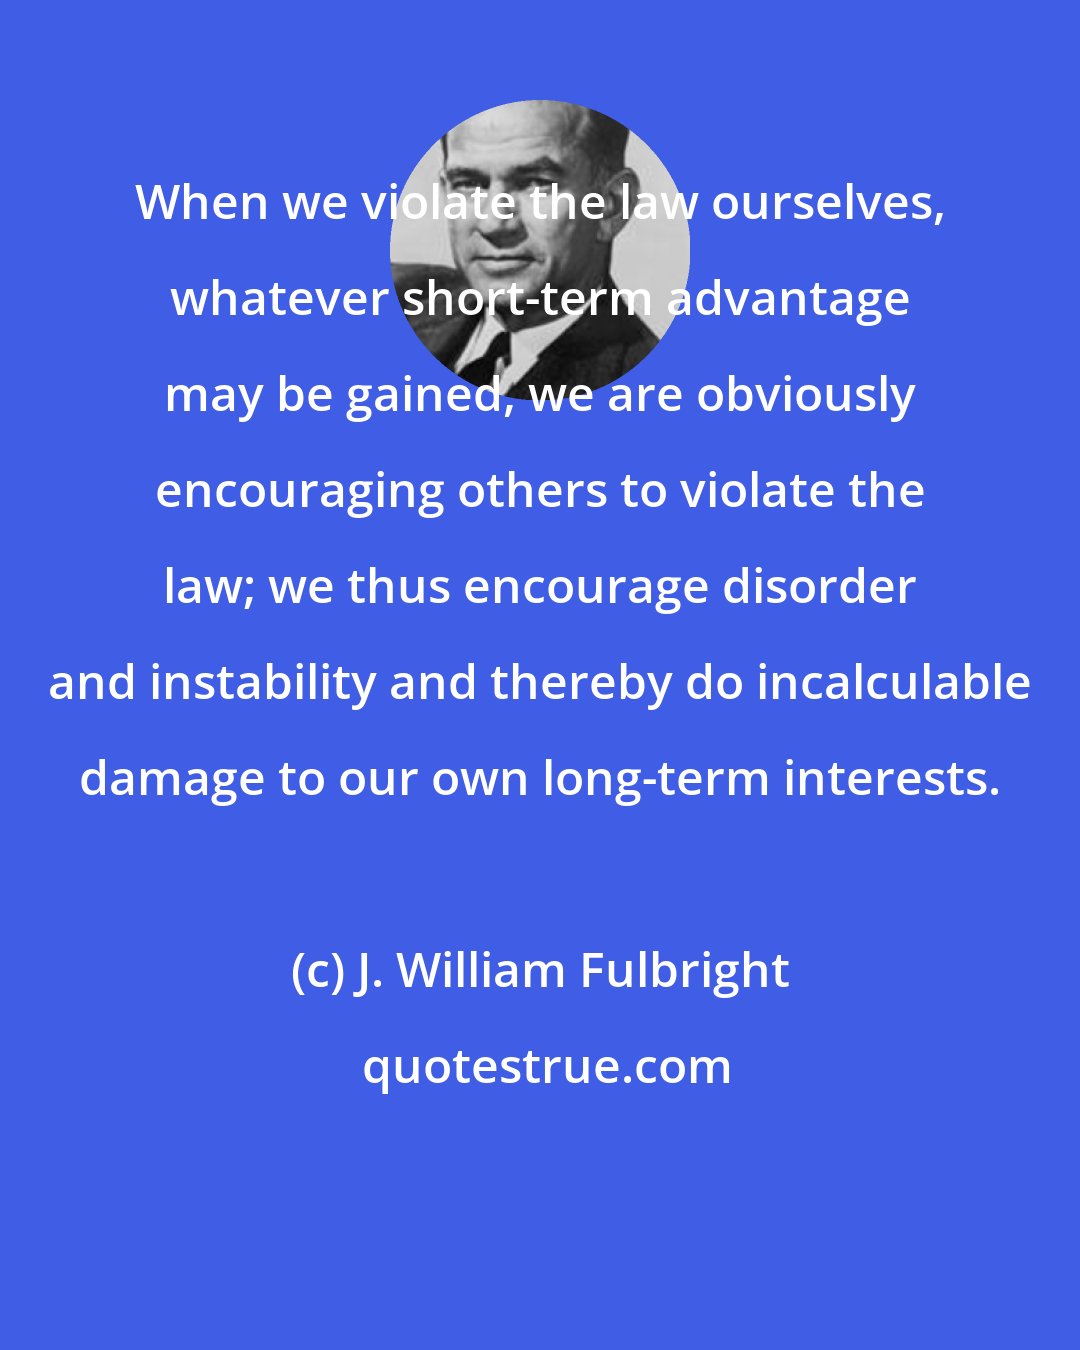 J. William Fulbright: When we violate the law ourselves, whatever short-term advantage may be gained, we are obviously encouraging others to violate the law; we thus encourage disorder and instability and thereby do incalculable damage to our own long-term interests.